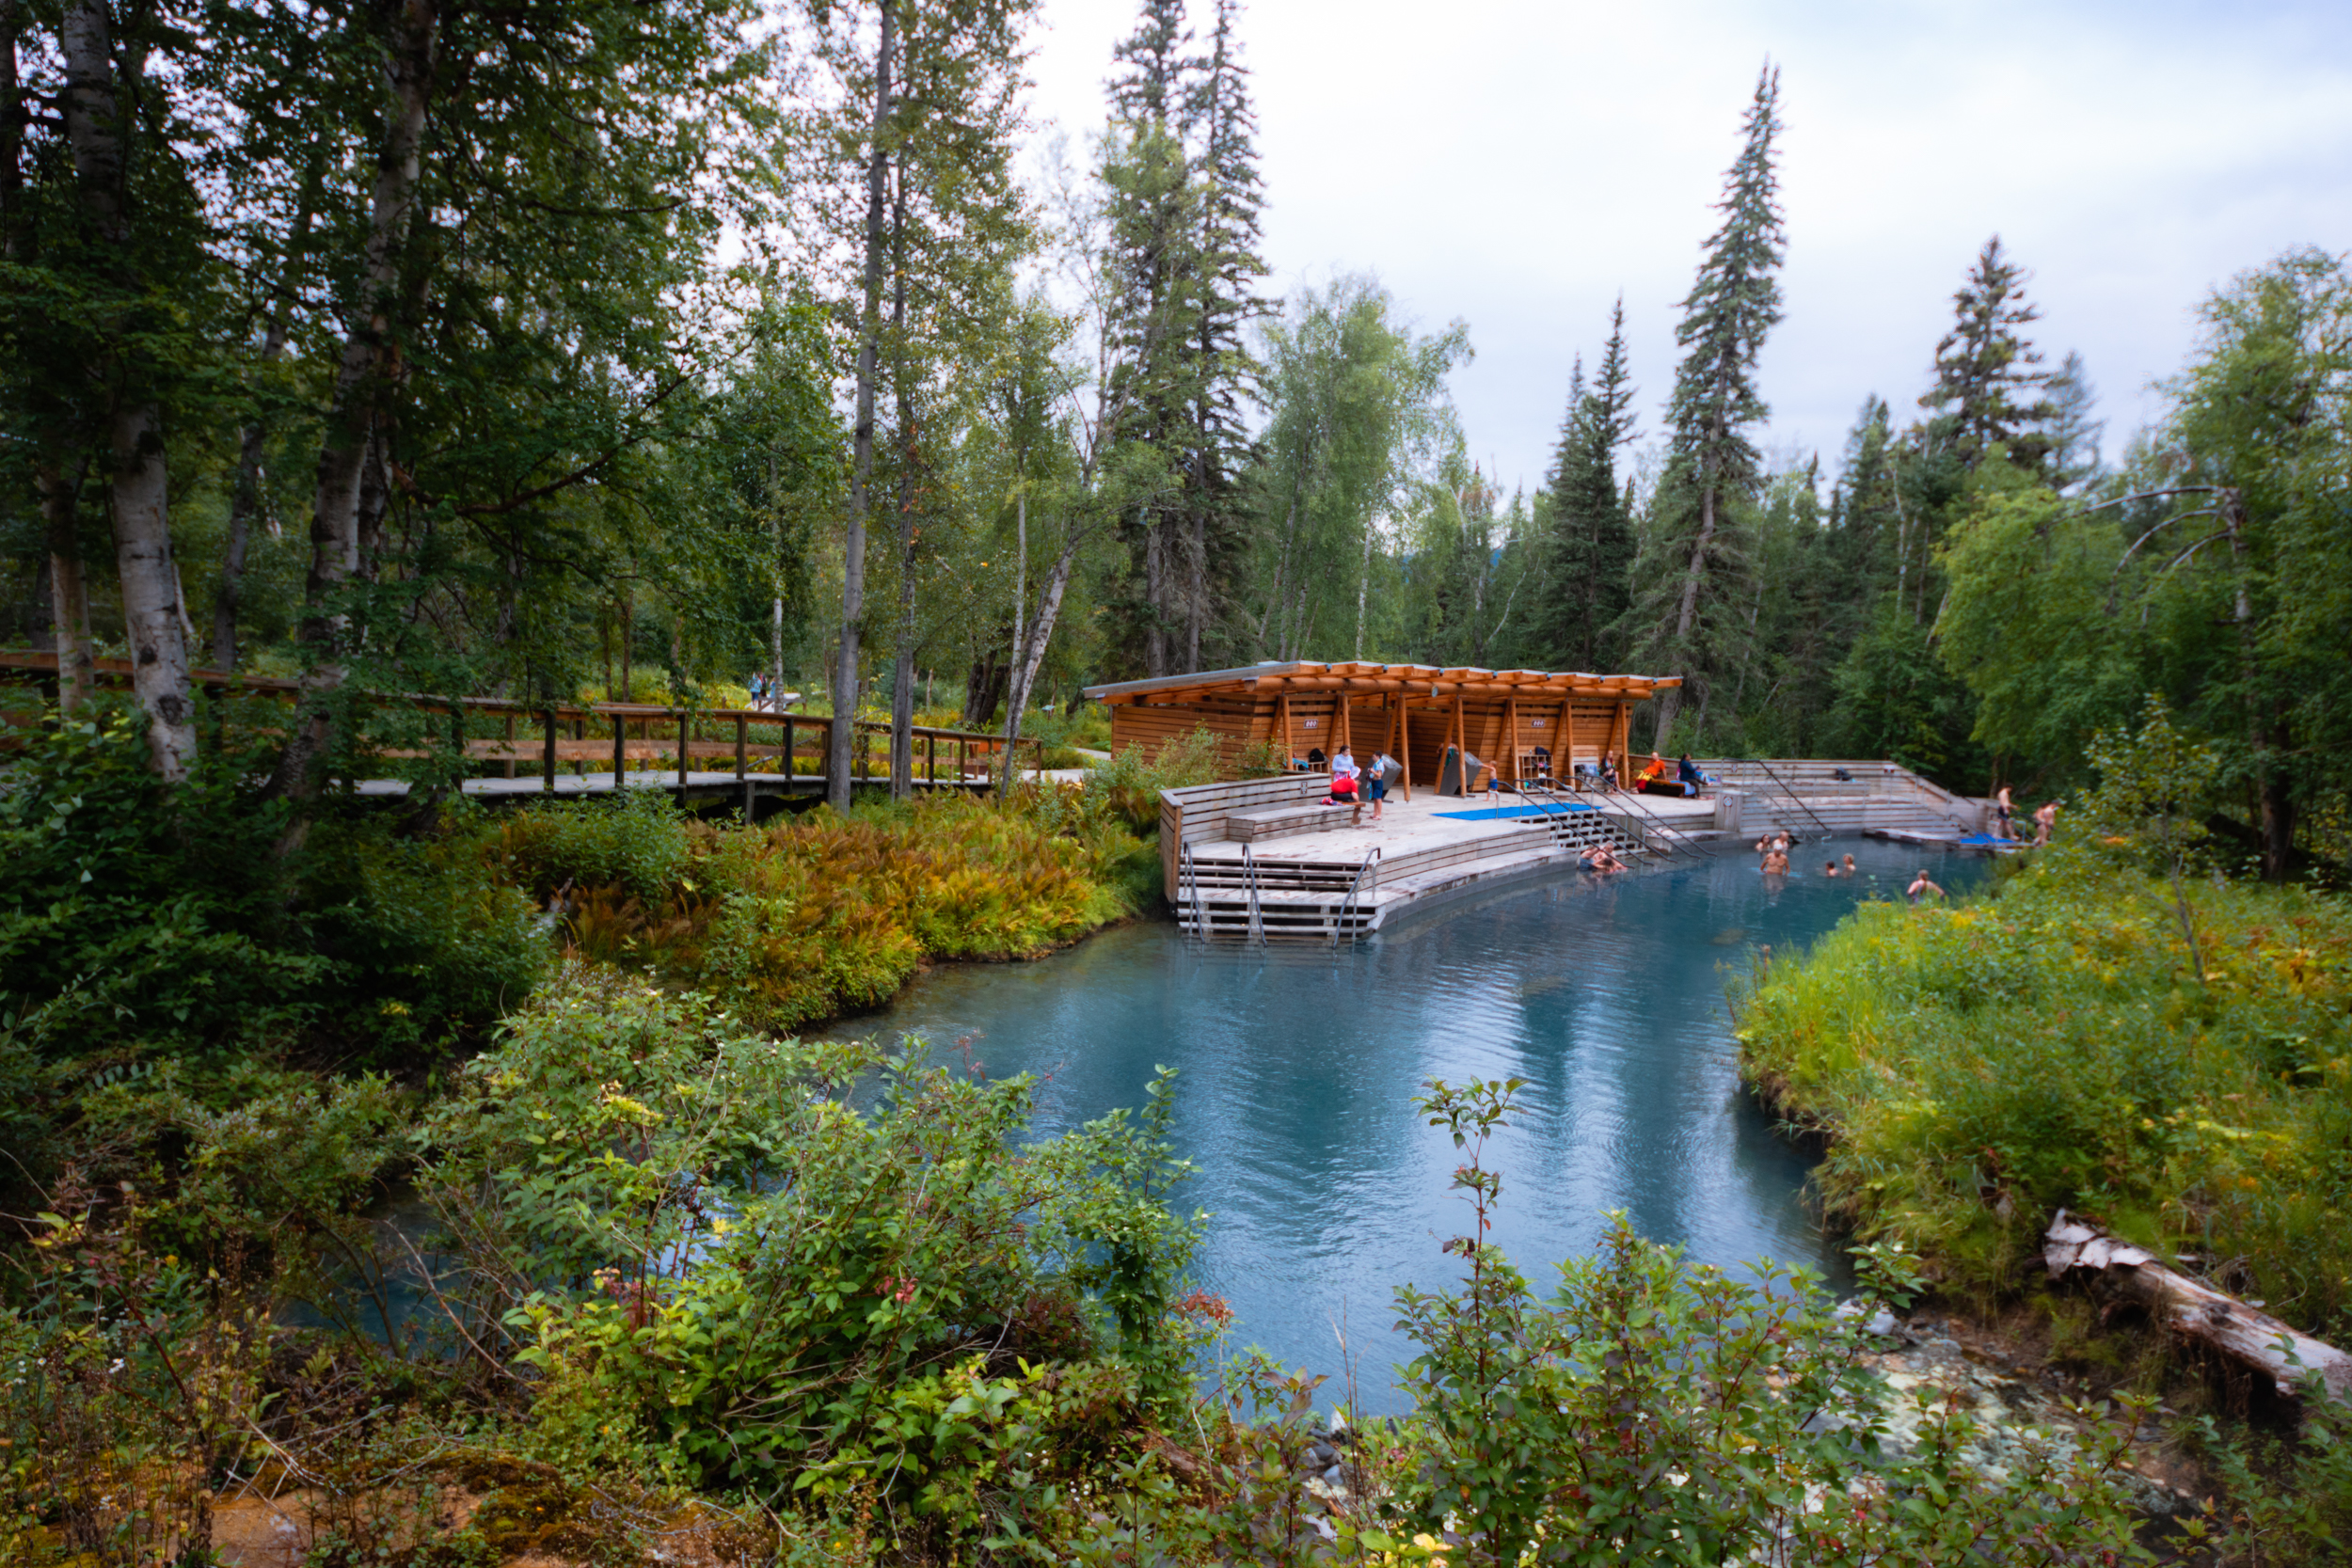 Park Guide: Liard River Hot Springs Provincial Park in Northern BC